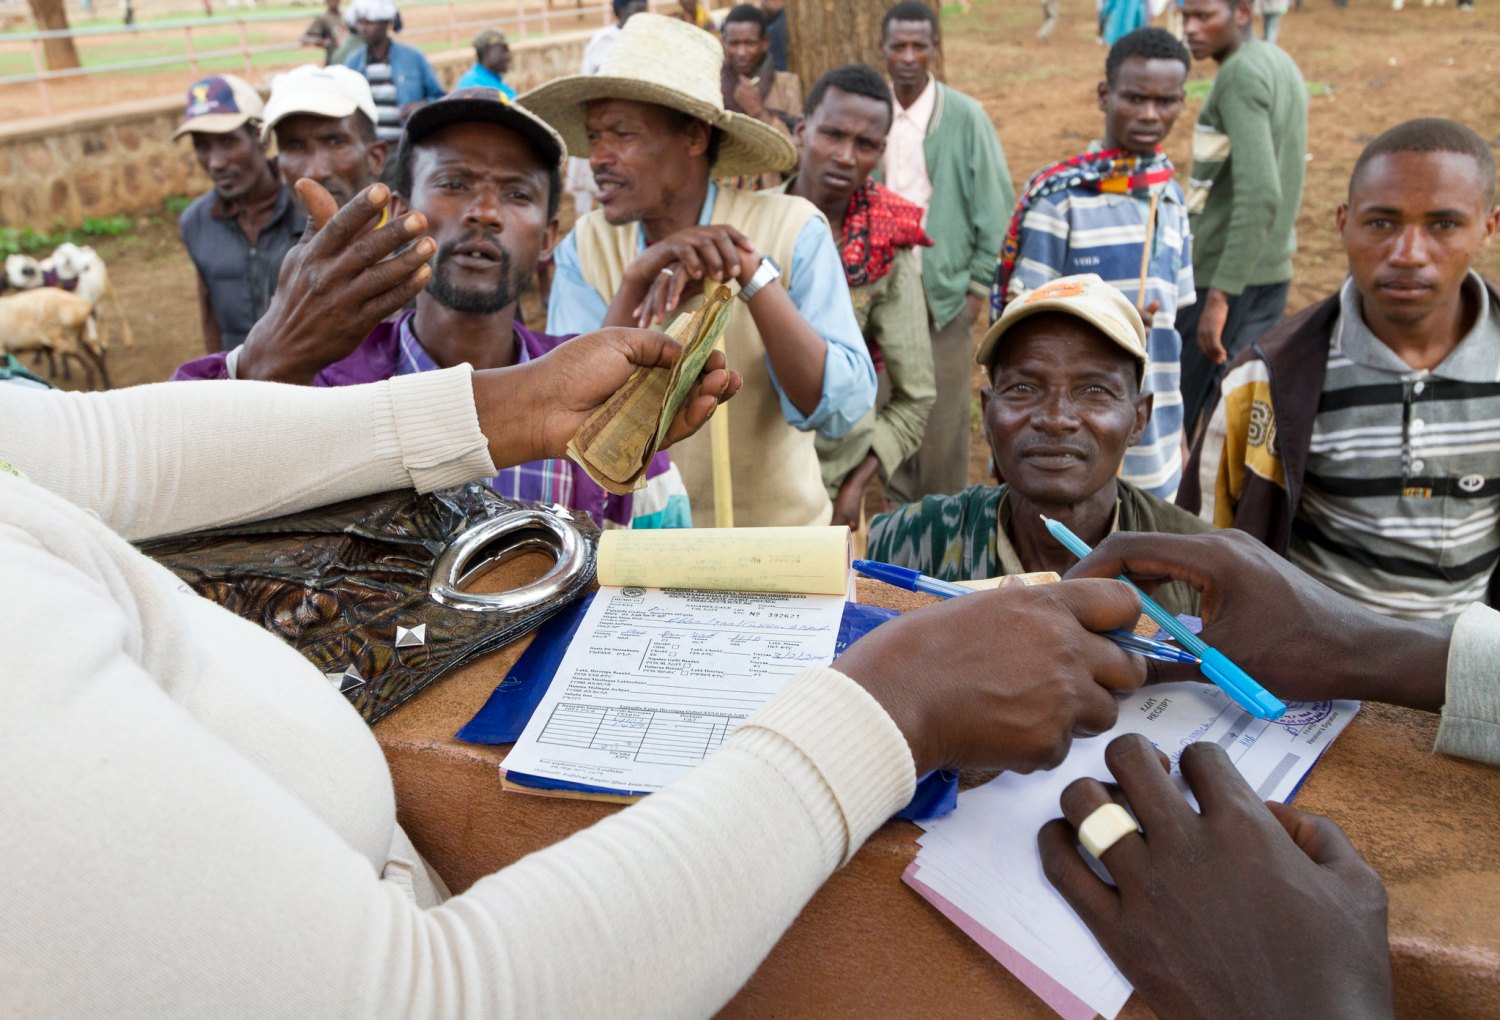 Traders pay taxes at a livestock market in Southern Ethiopia (photo credit: USAID Ethiopia, CC BY-NC 2.0)